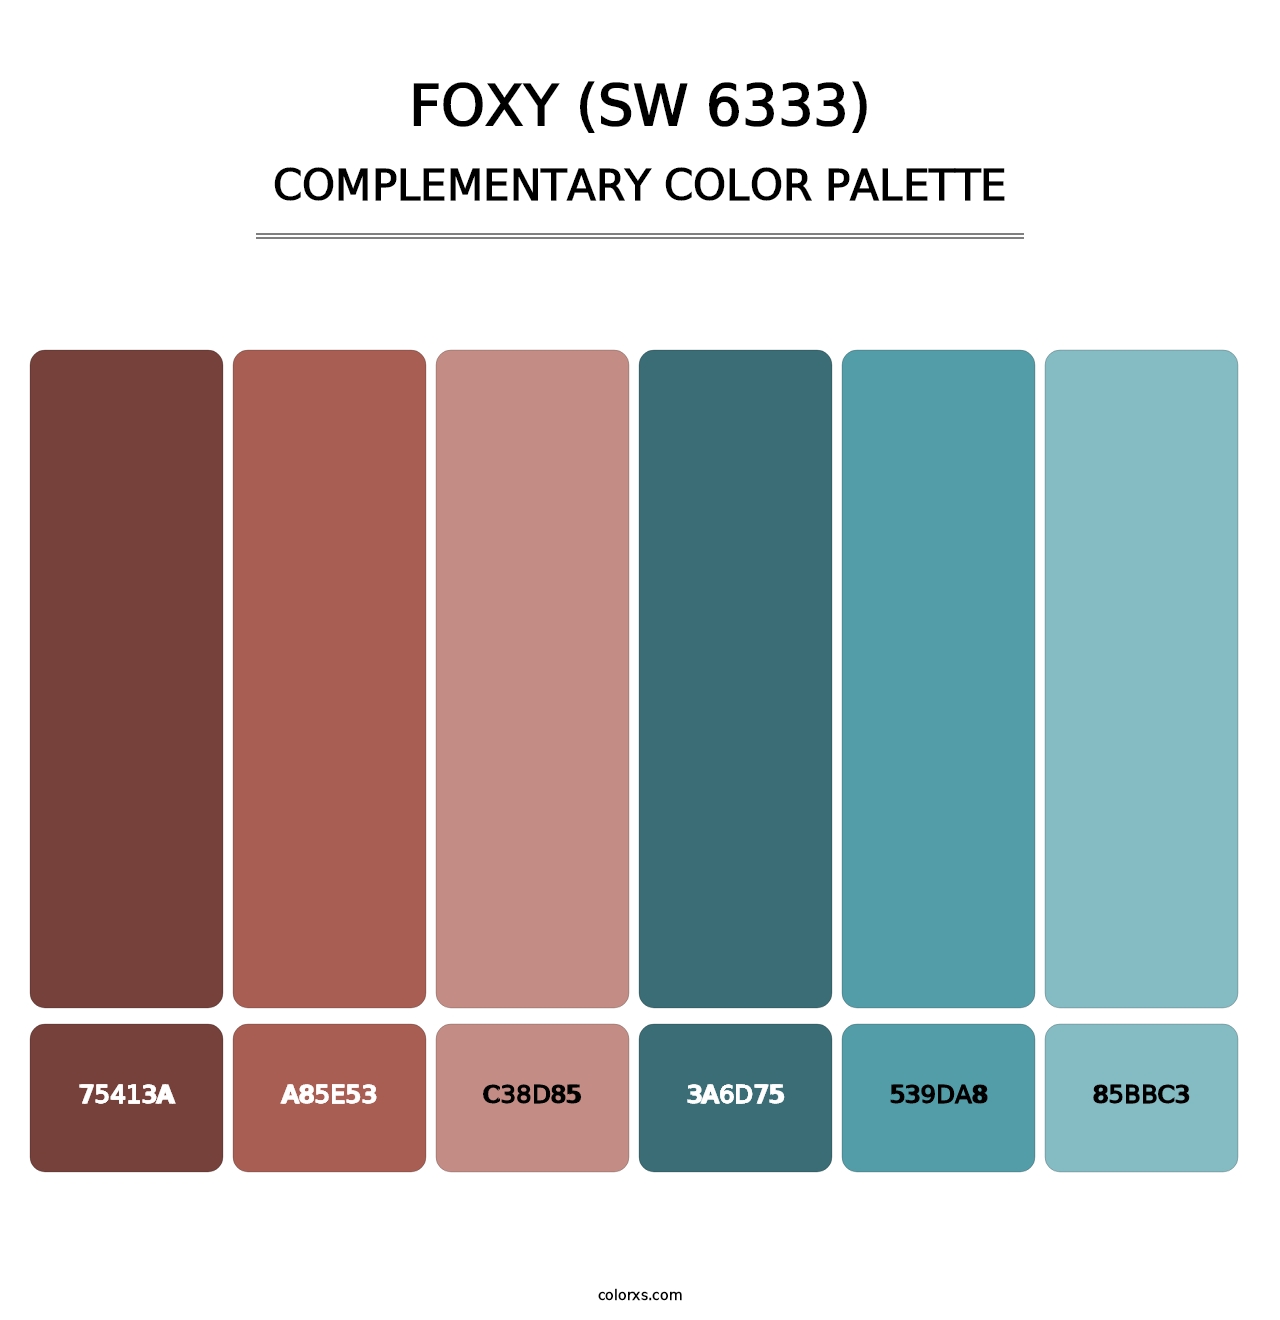 Foxy (SW 6333) - Complementary Color Palette